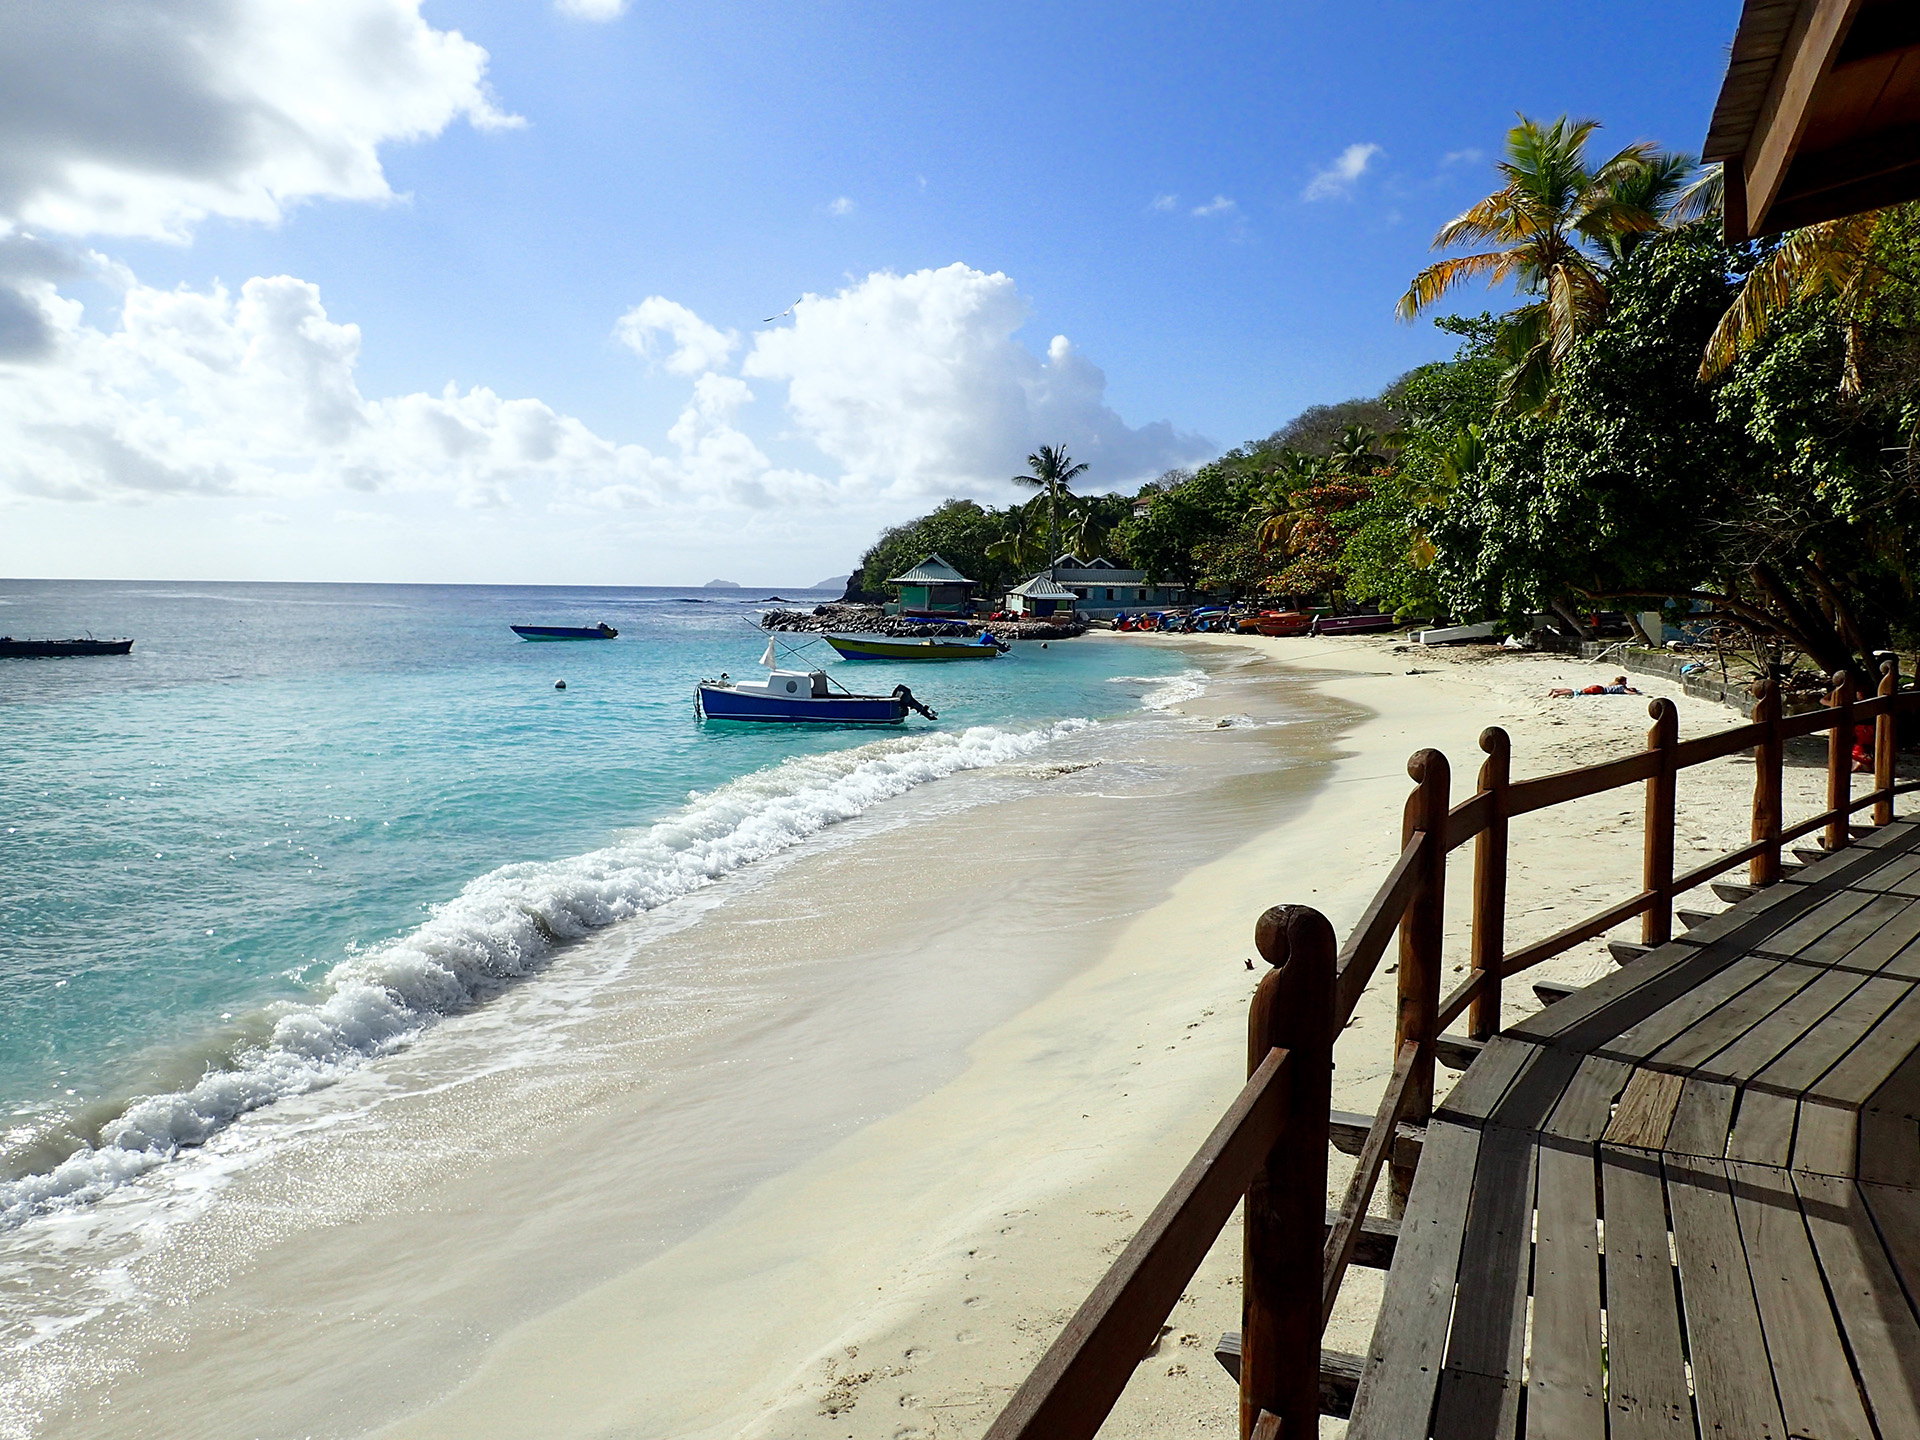 View of a beach on Bequia island, Grenadines